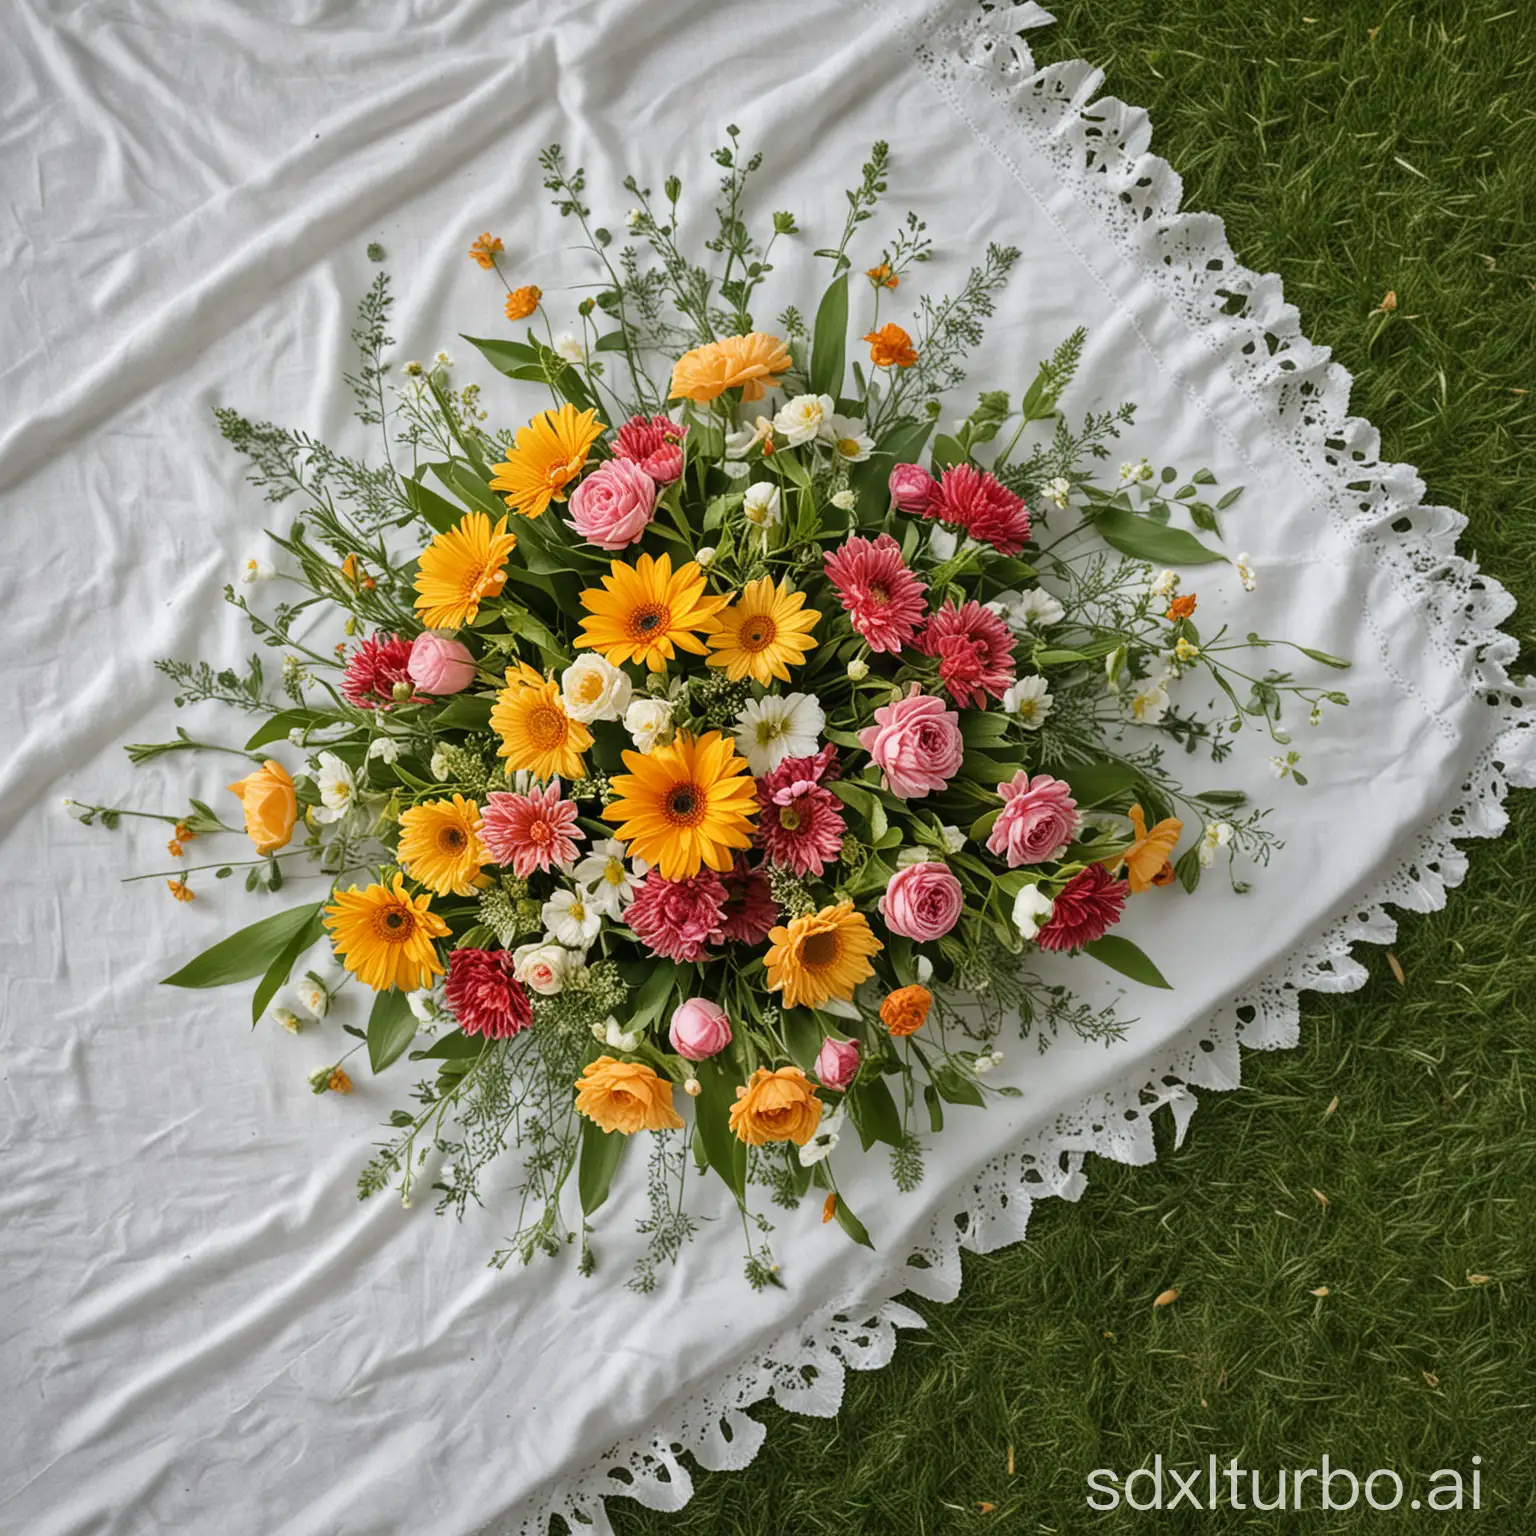 a bunch of beautiful arranged flowers, on a white tablecloth, surrounded by green lawn